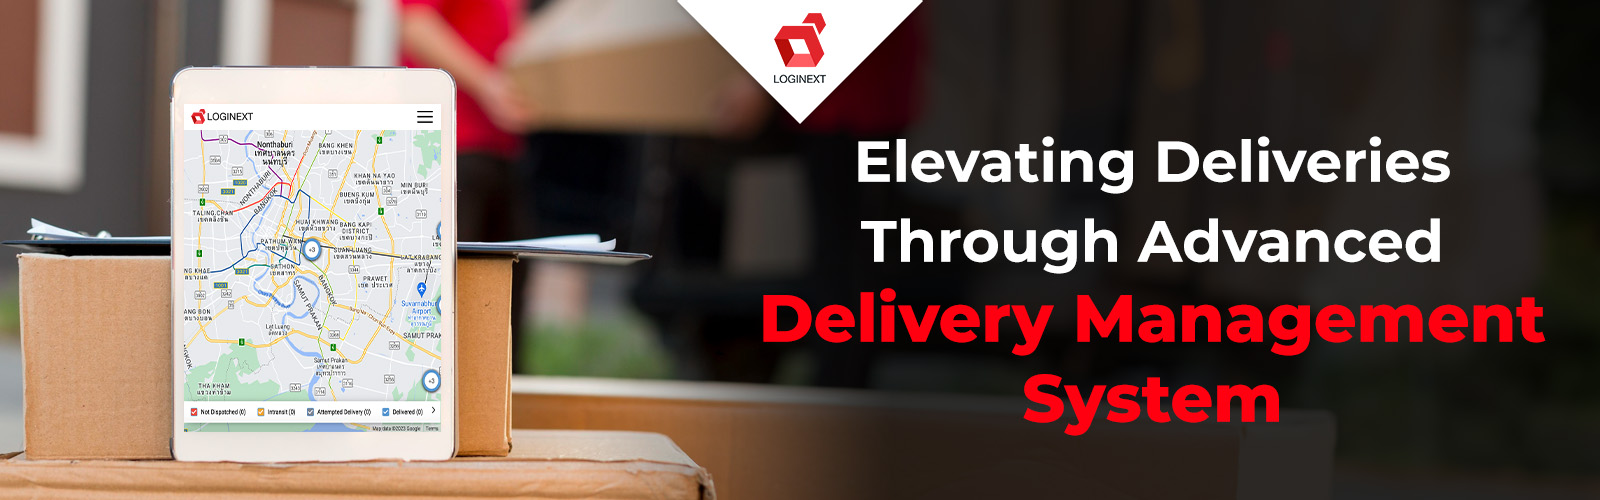 Elevating Deliveries With Advanced Delivery Management System